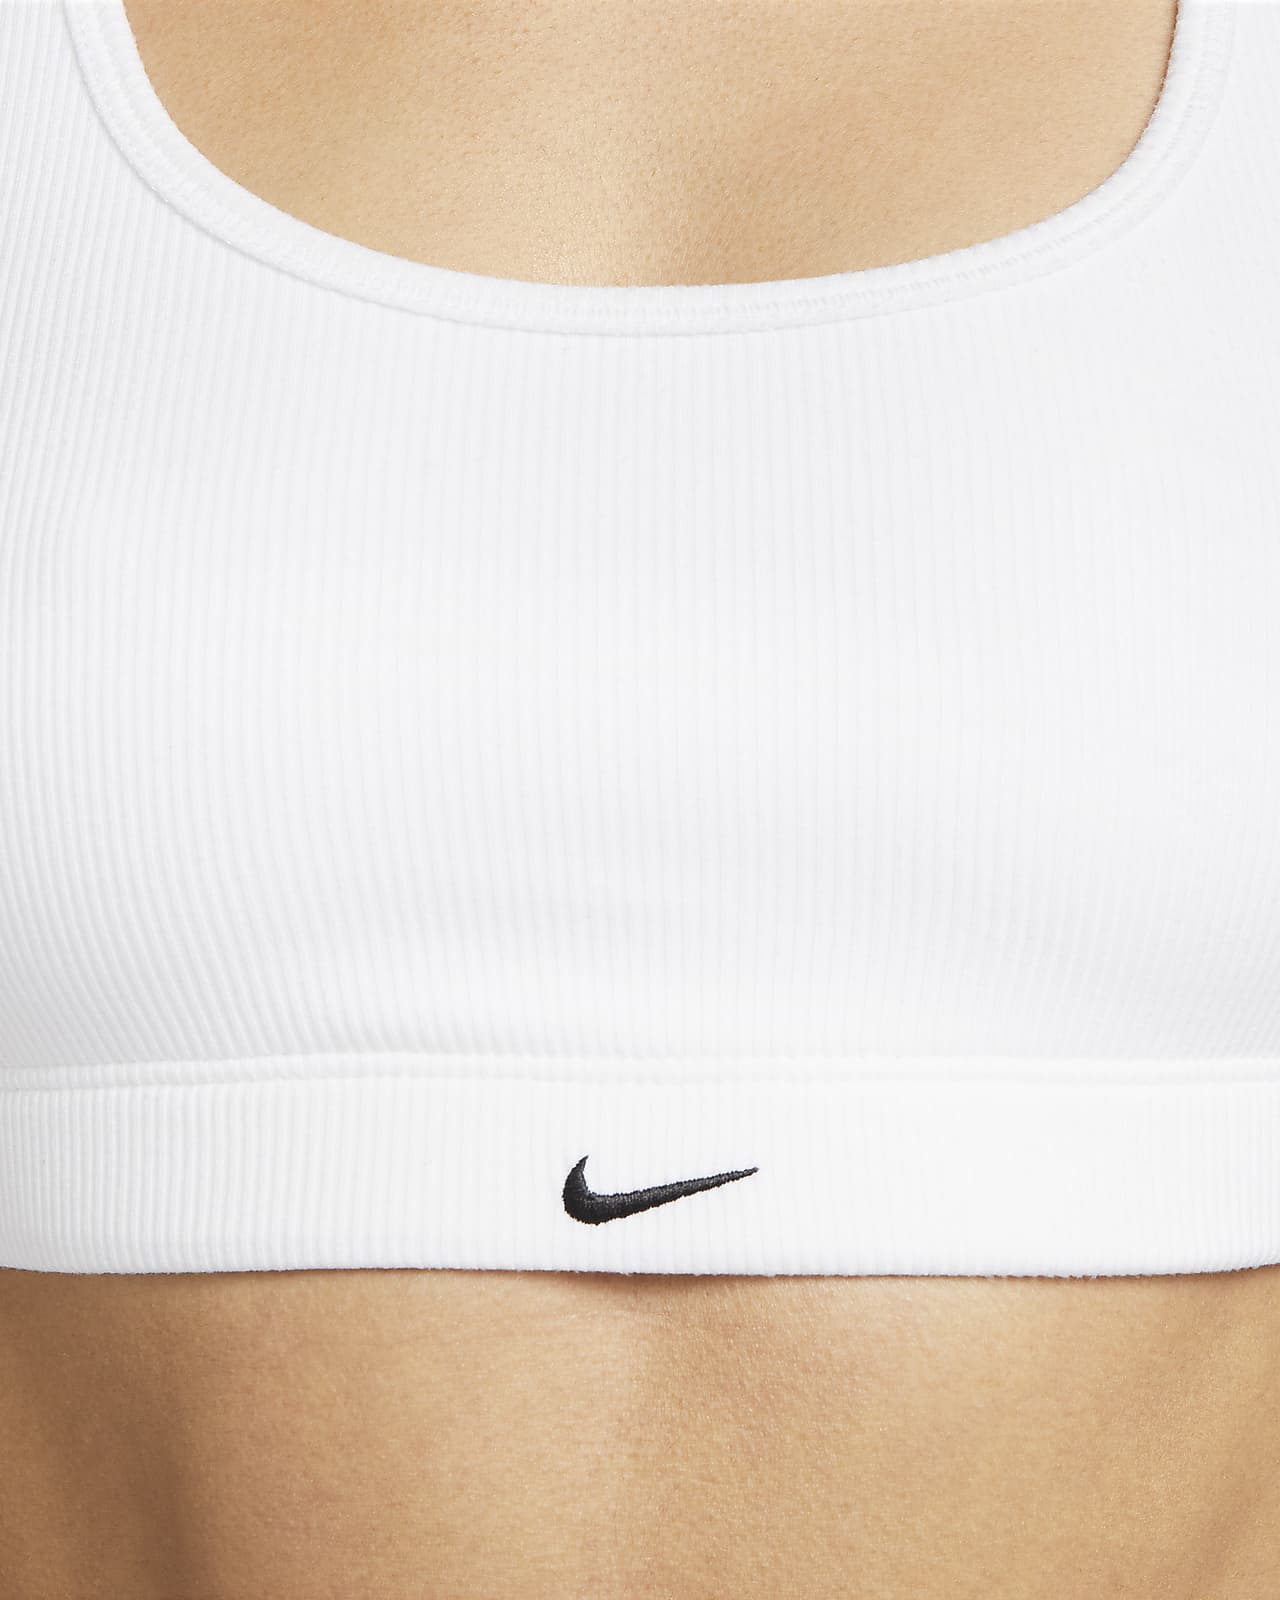 Cloud-like comfort, second-skin feel, the no-bra bra. Someone pls stop  us…we could go on about Alate sports bras forever. Designed to s